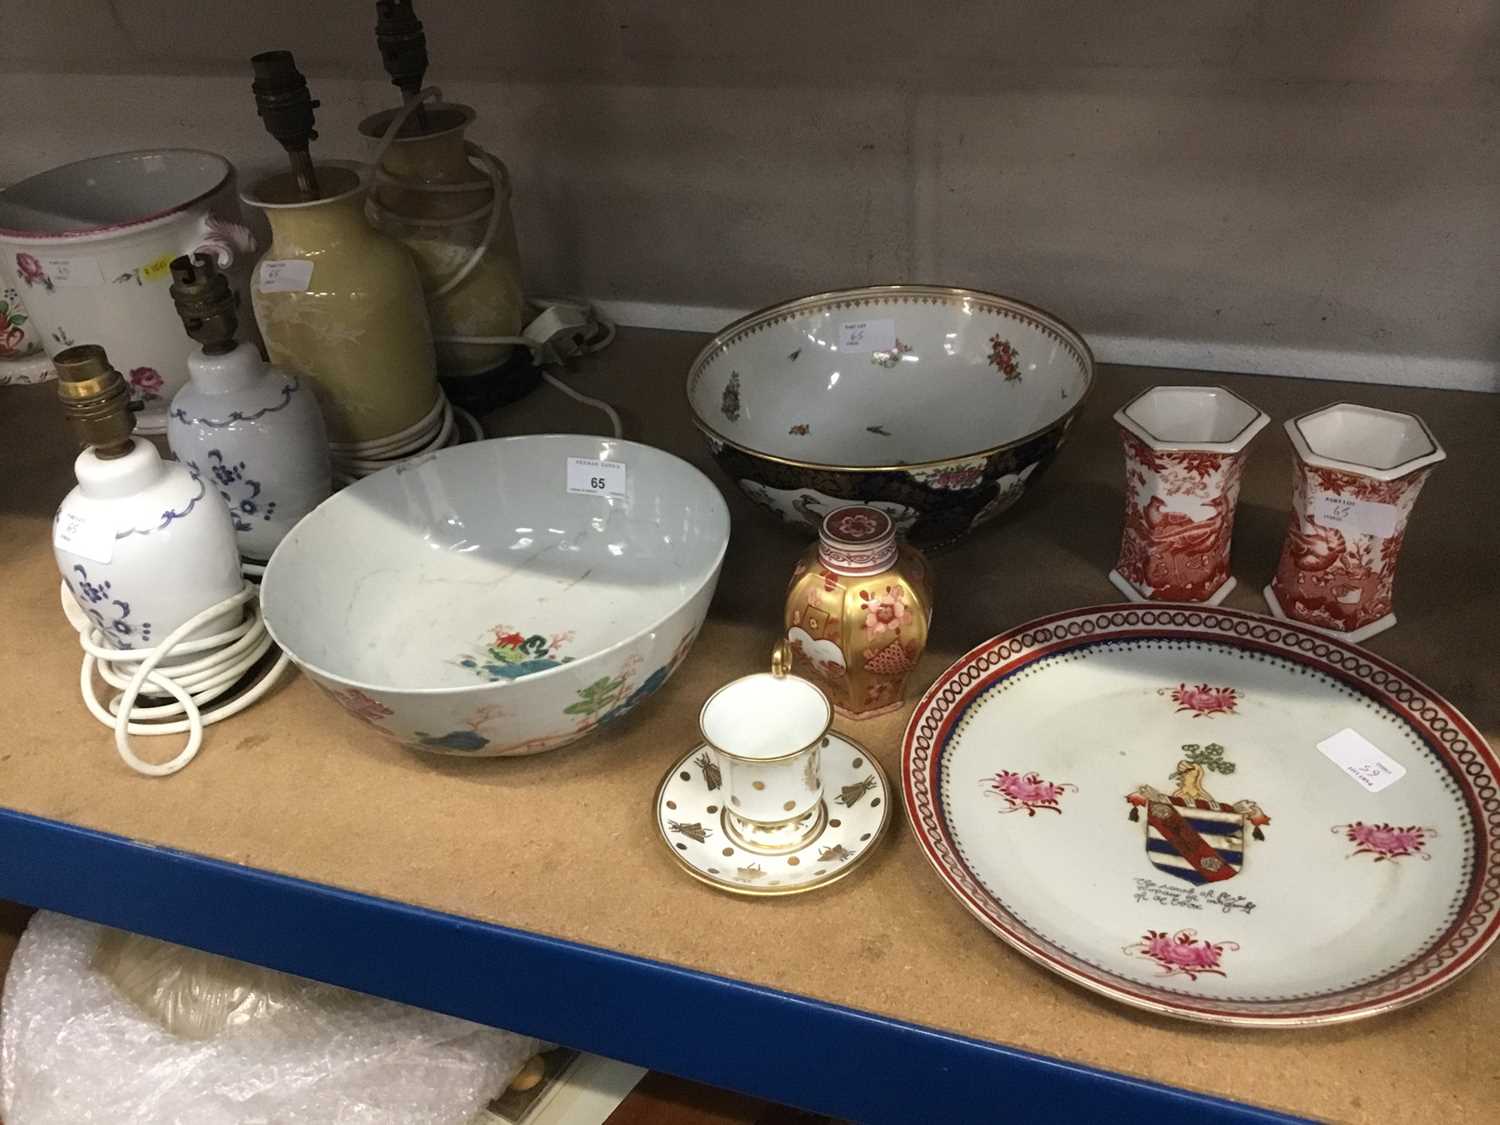 Lot 65 - 18th century Chinese export punch bowl, Pair Royal Crown Derby vases, decorative china and two pairs of table lamps